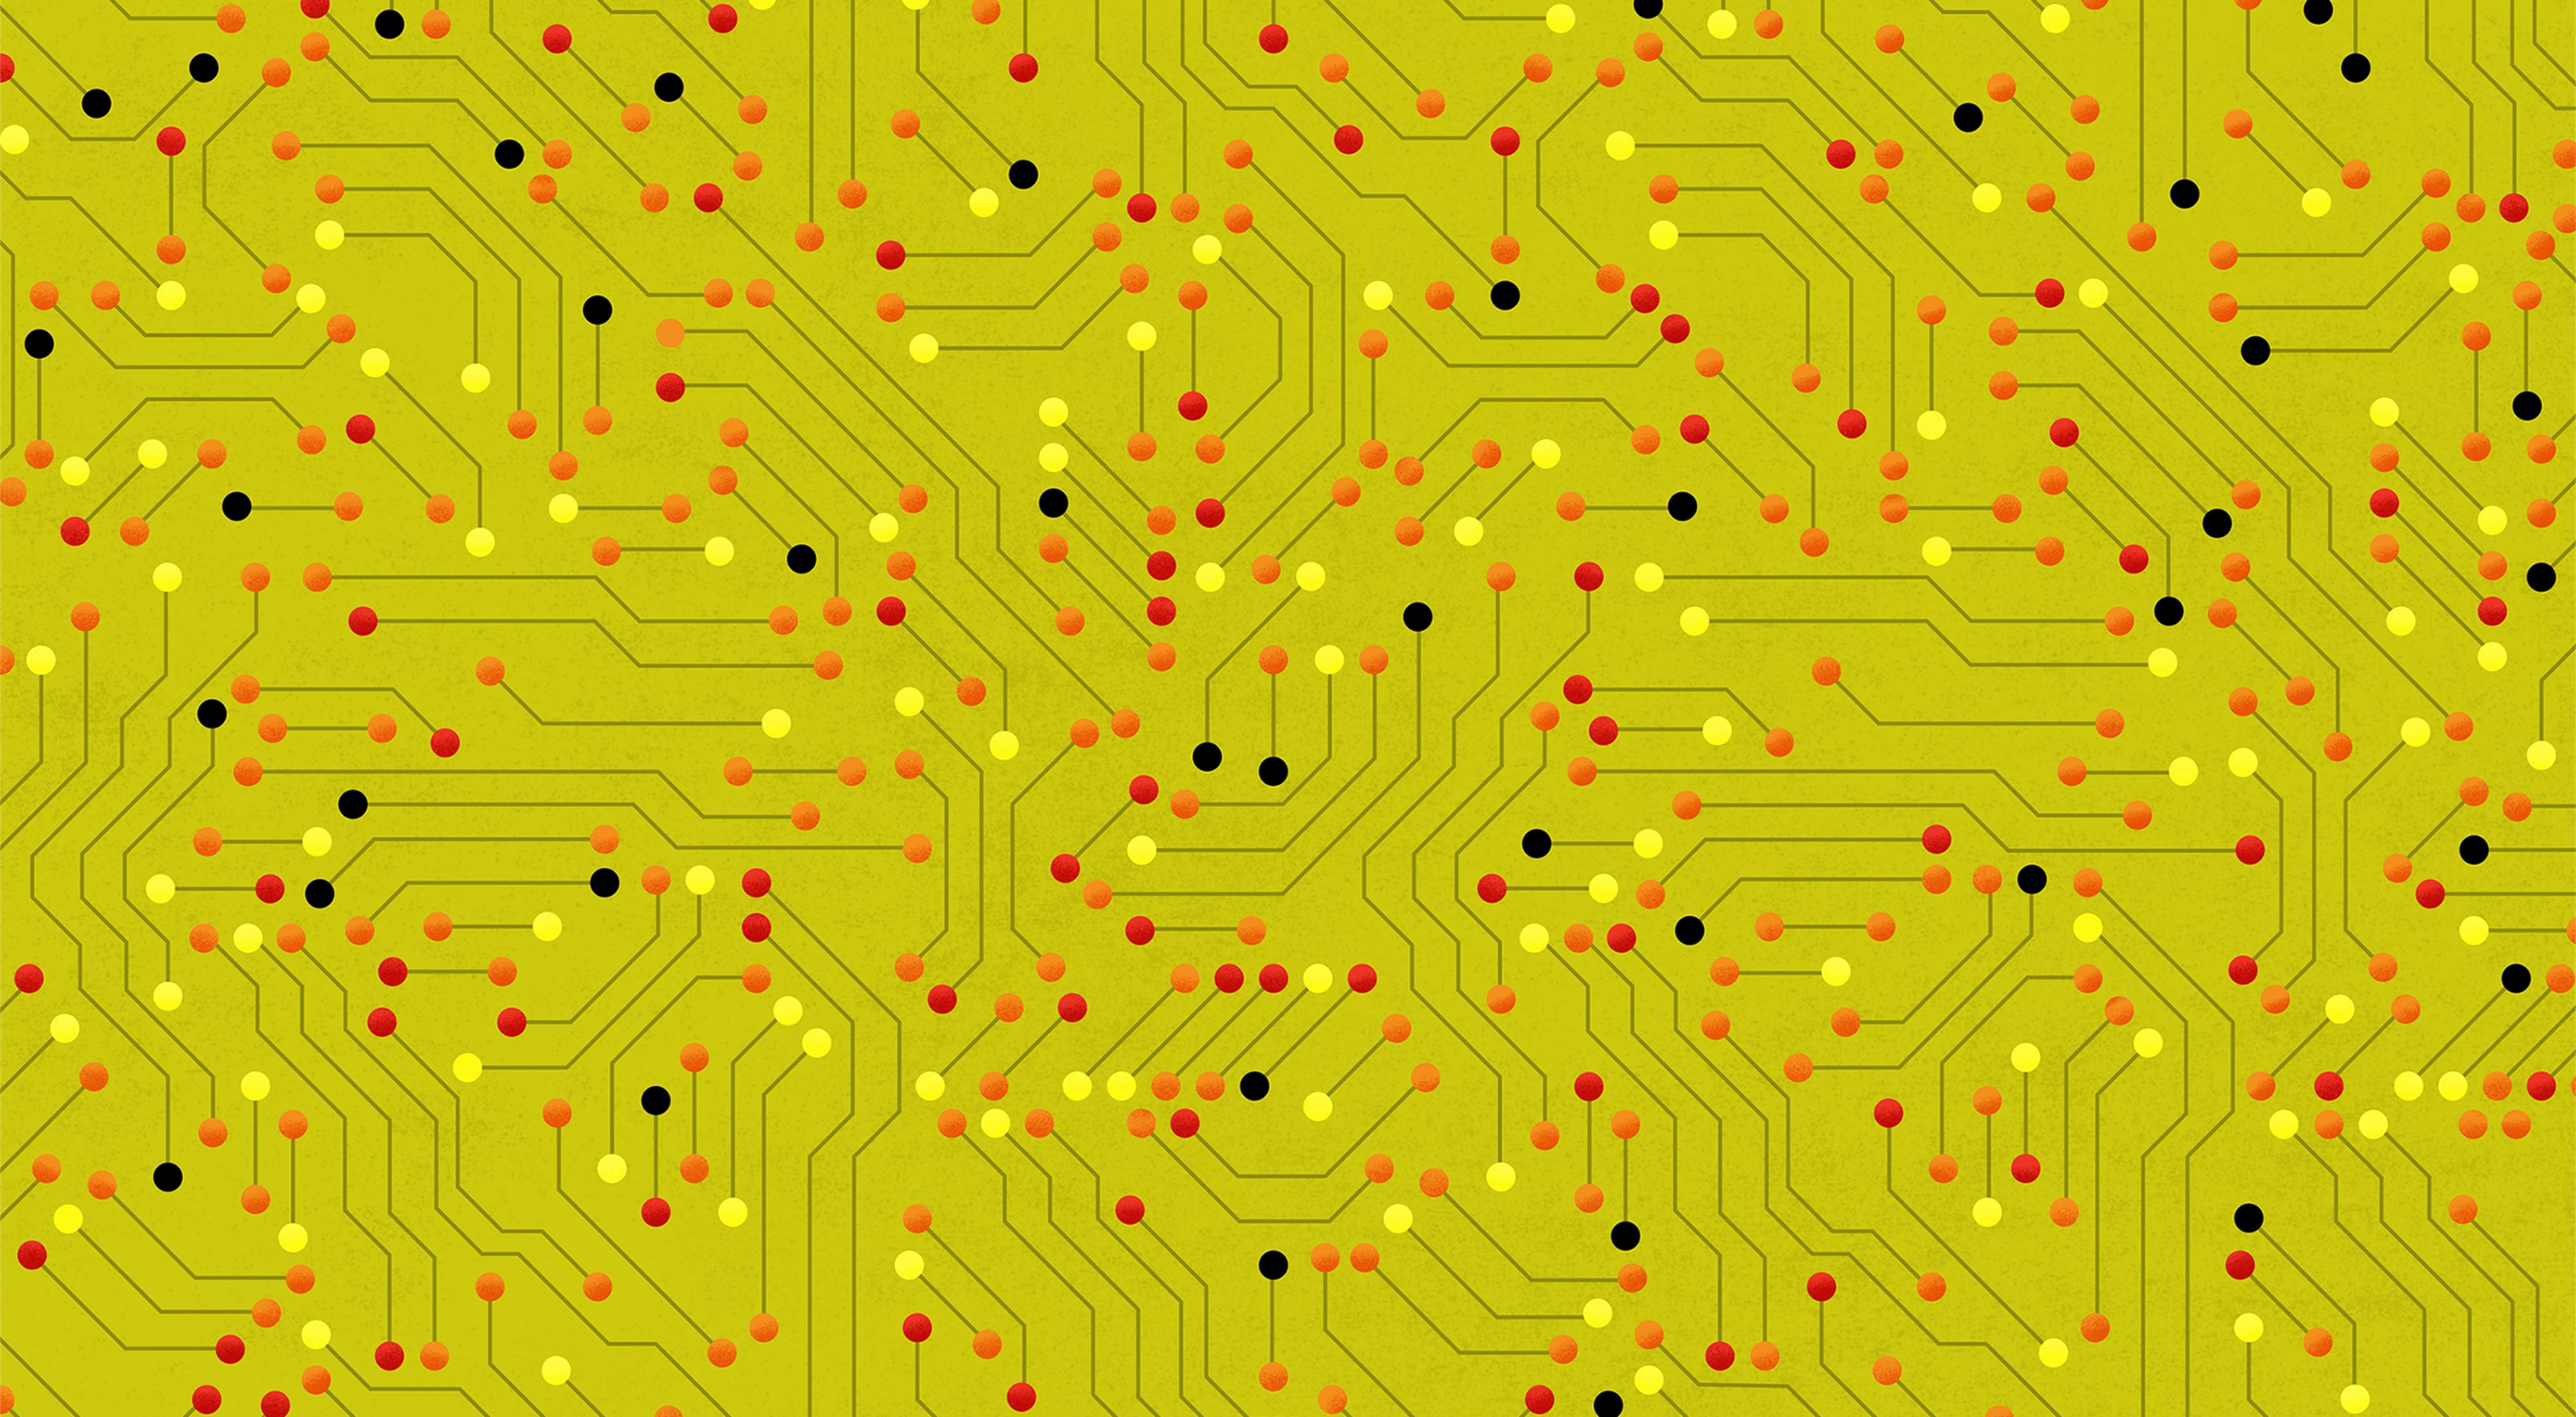 Graphic showing technology circuits on a yellow field.